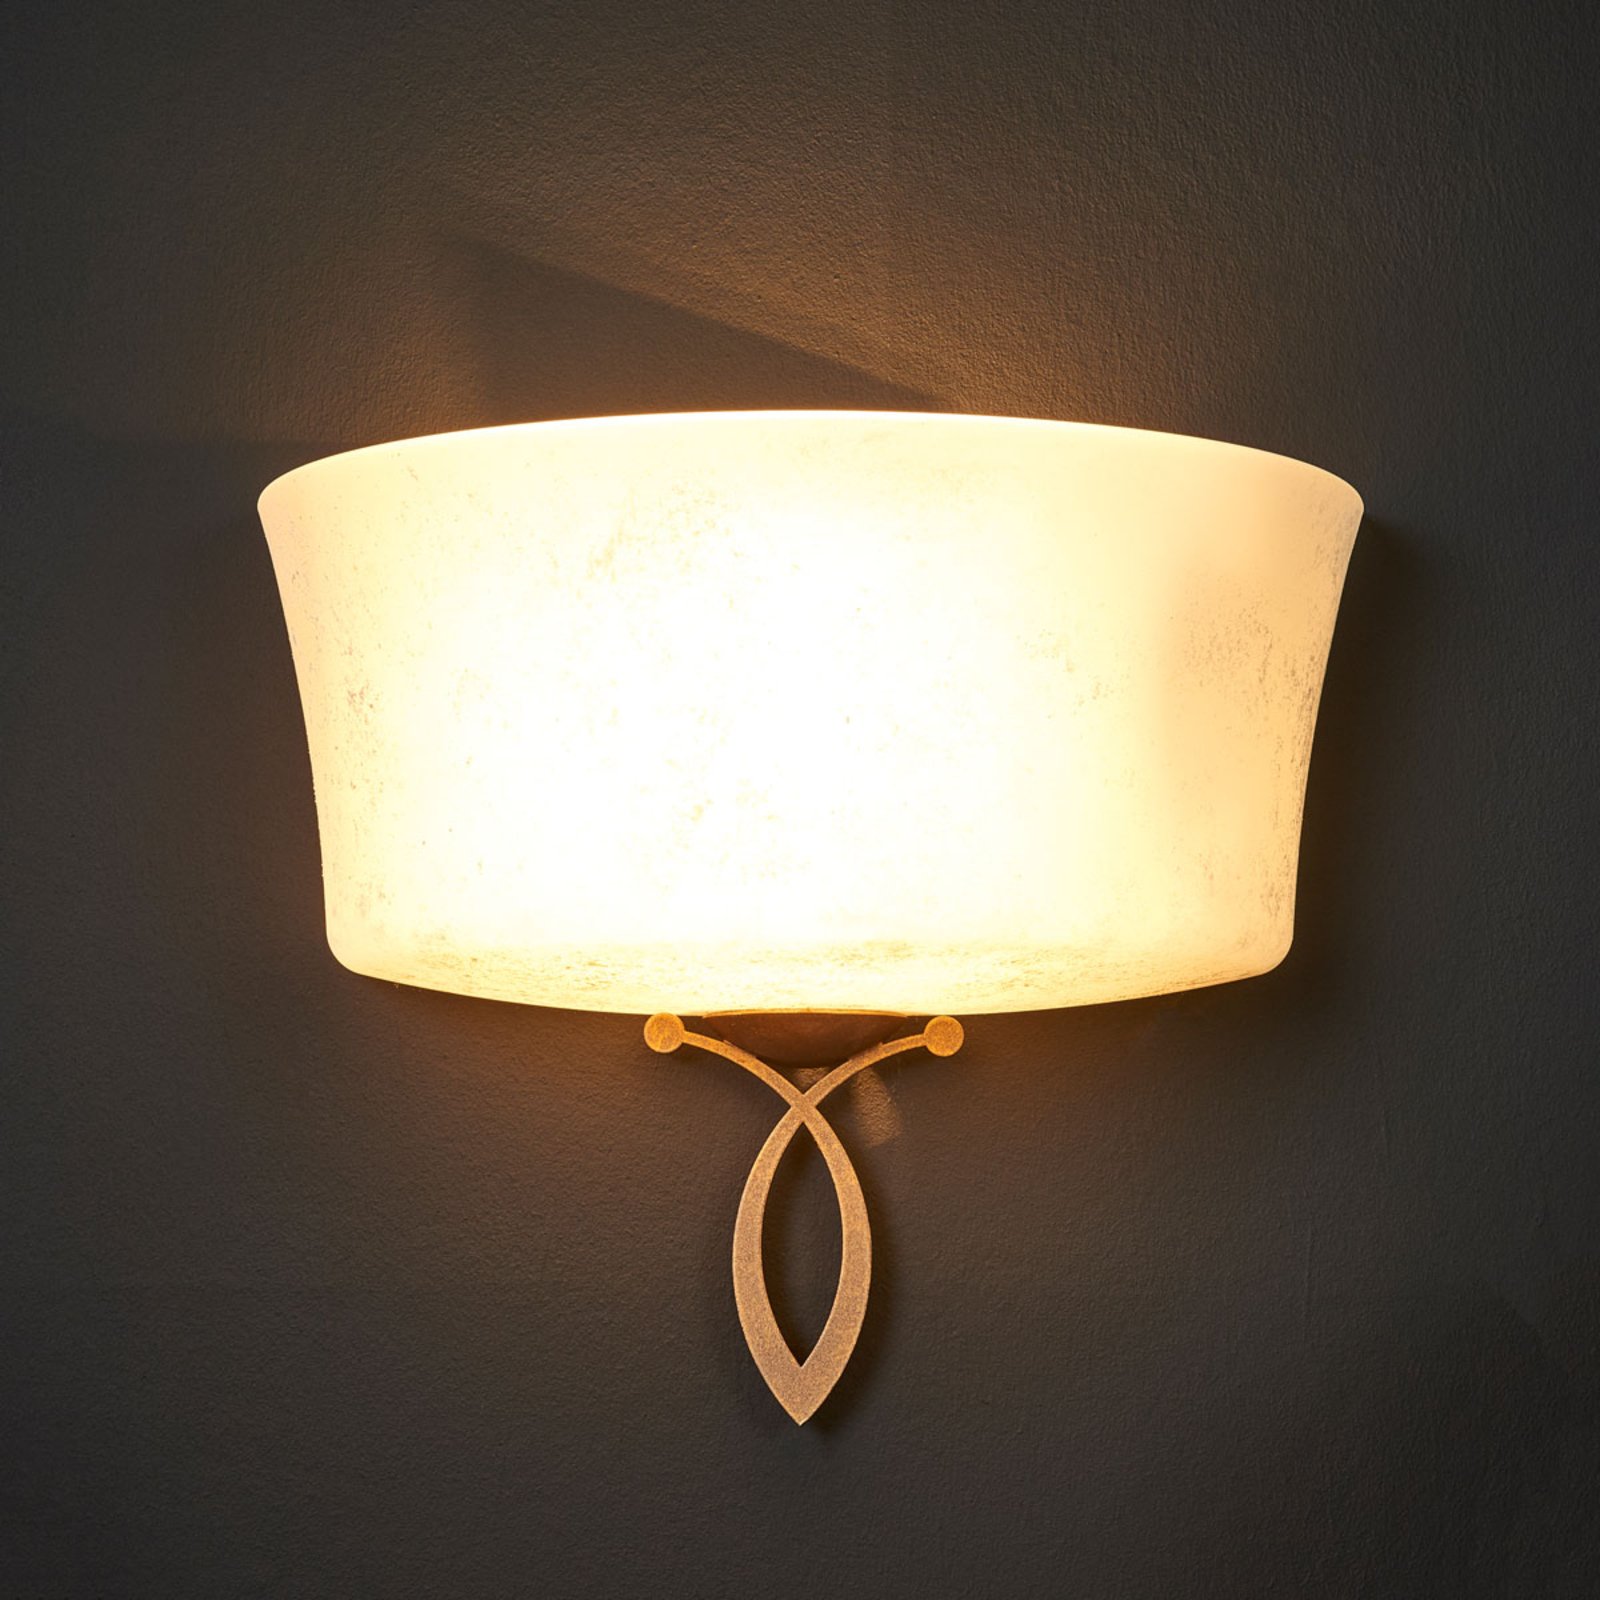 Alessio wall light in an uplighter design